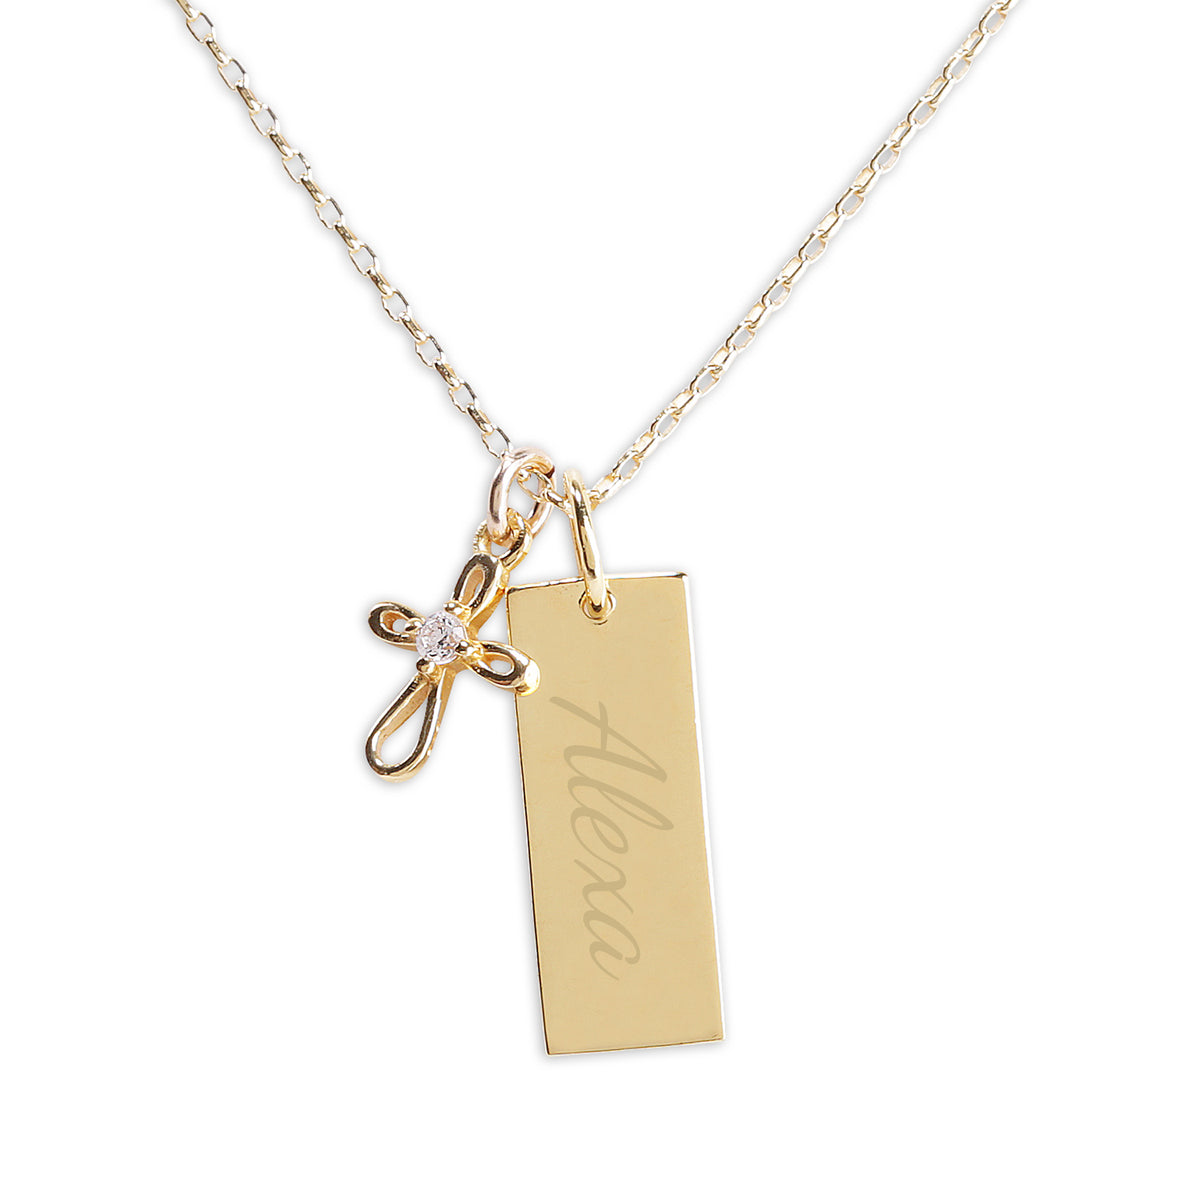 Girls Gold-Plated Cross Bar Necklace for First Communion Religous Gift –  Cherished Moments Jewelry